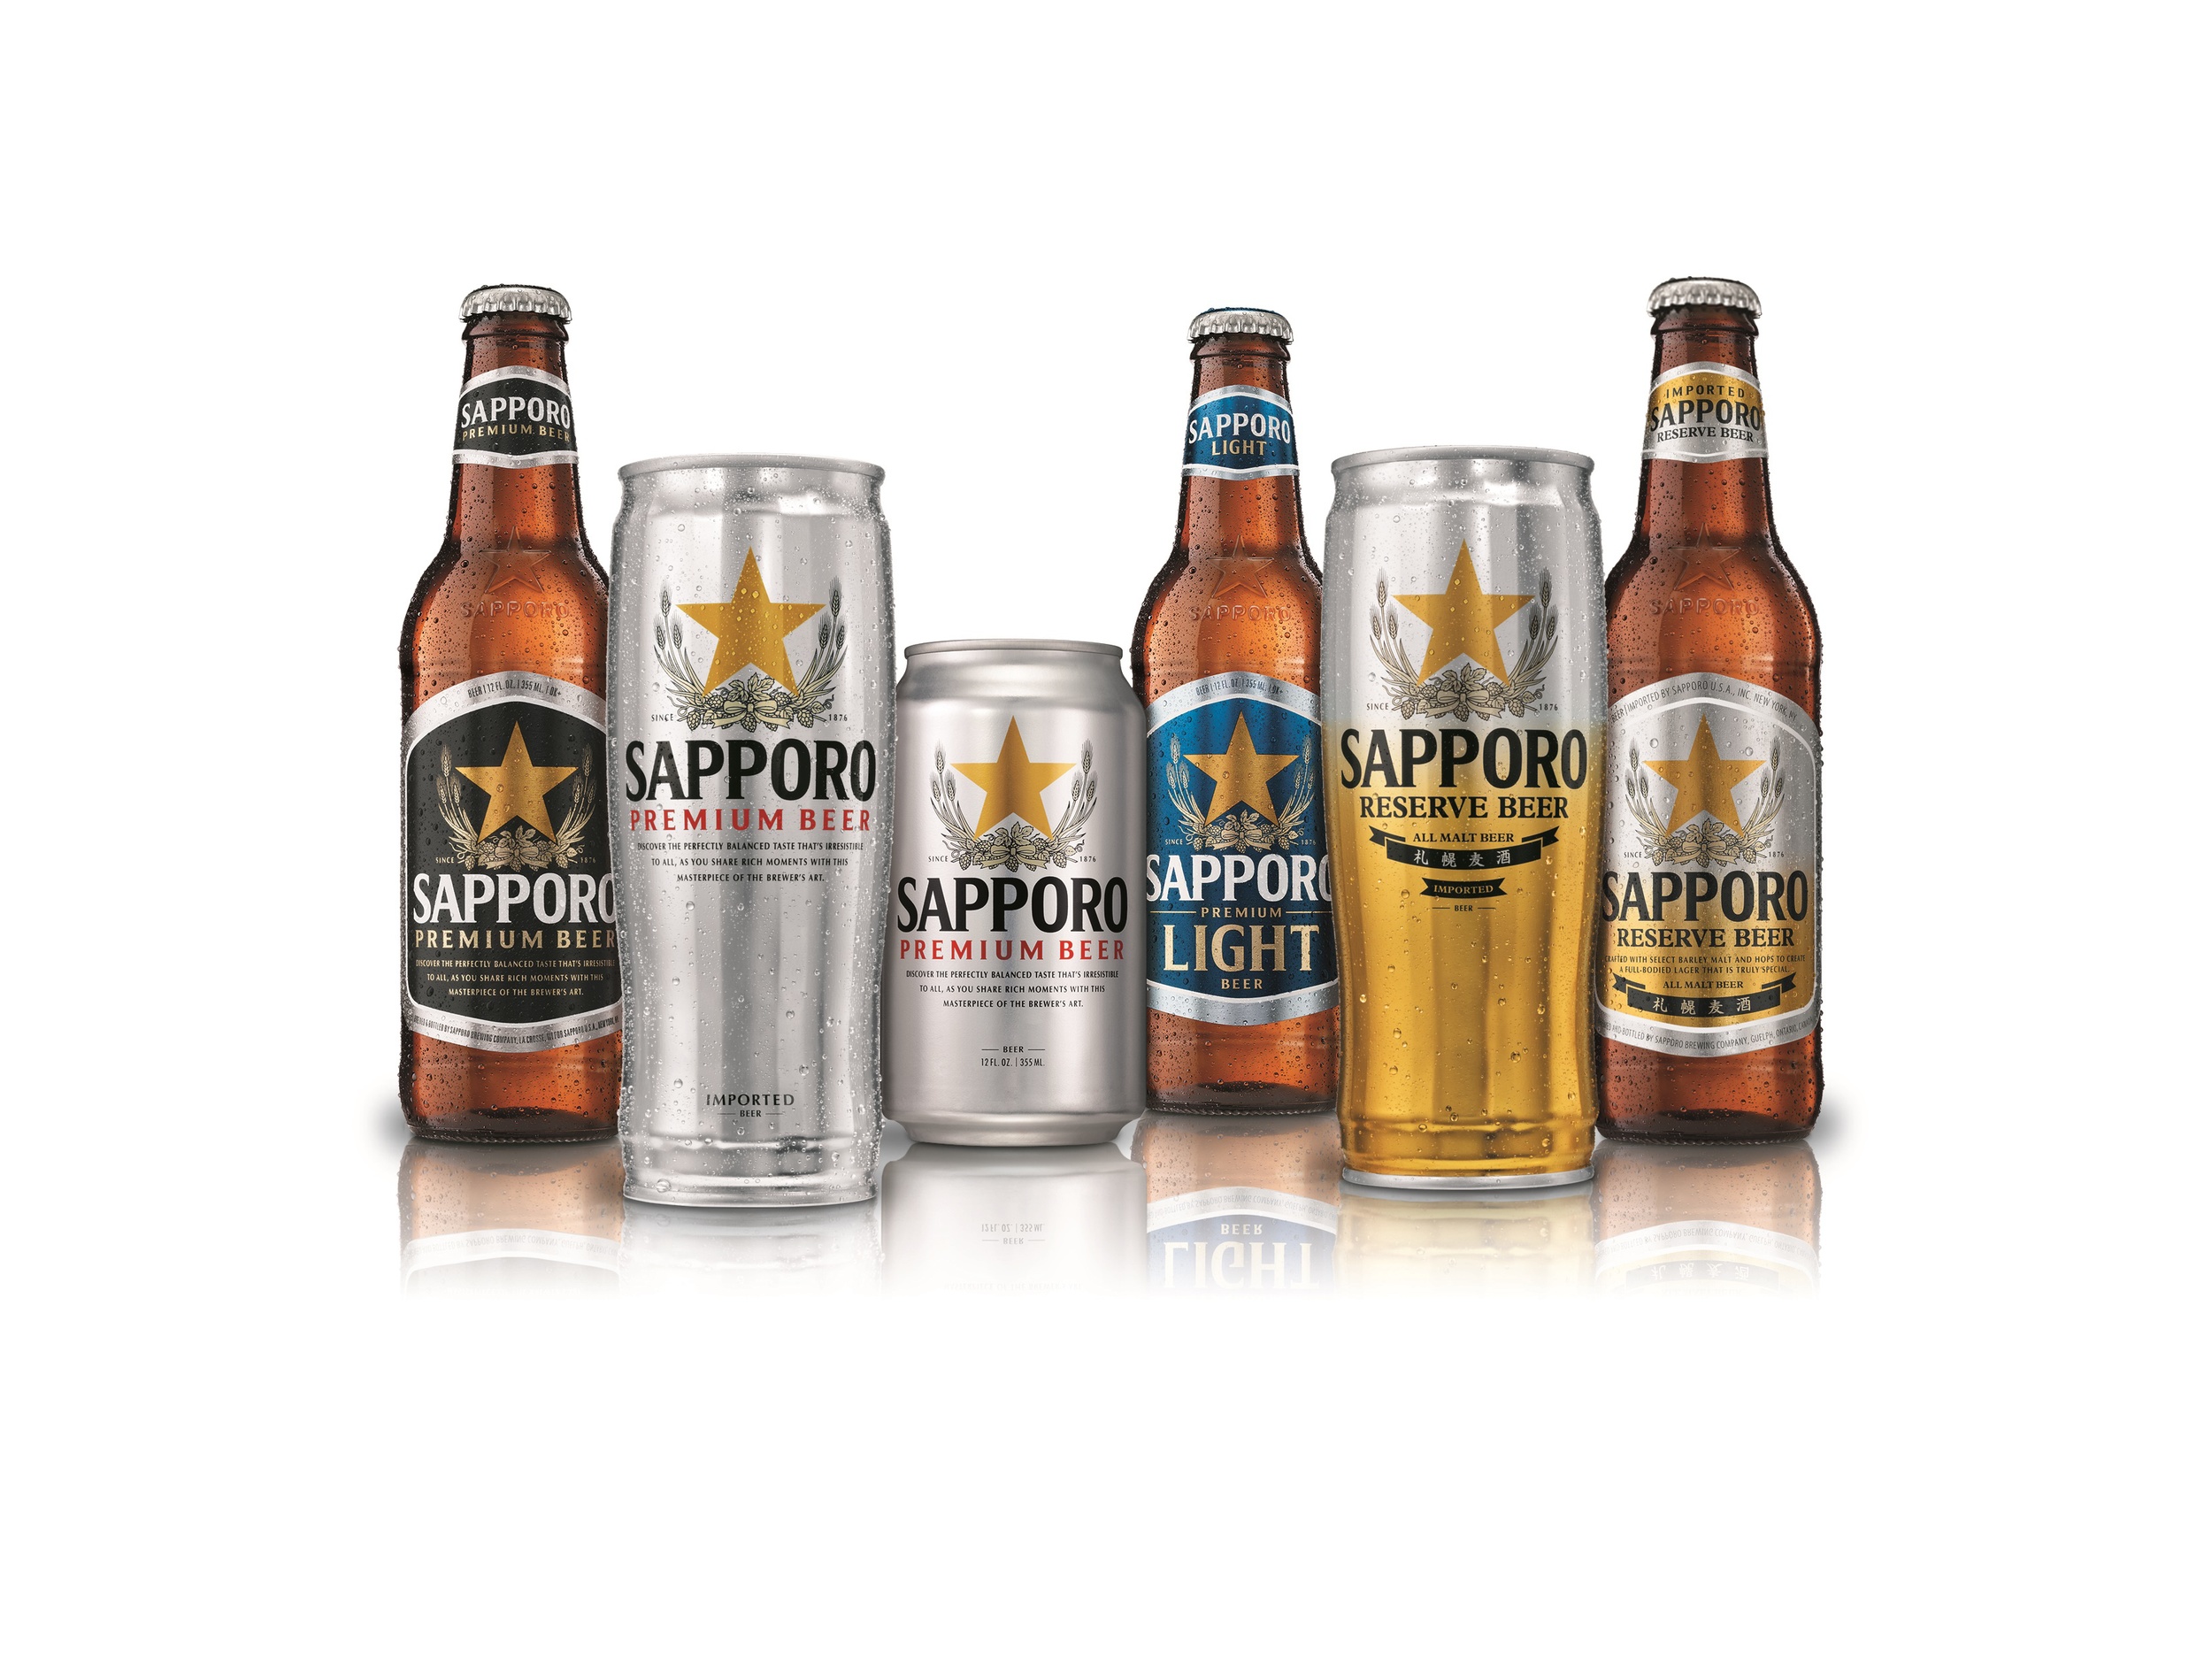 Sponsored: 10 Facts You Should Know About Sapporo Beer